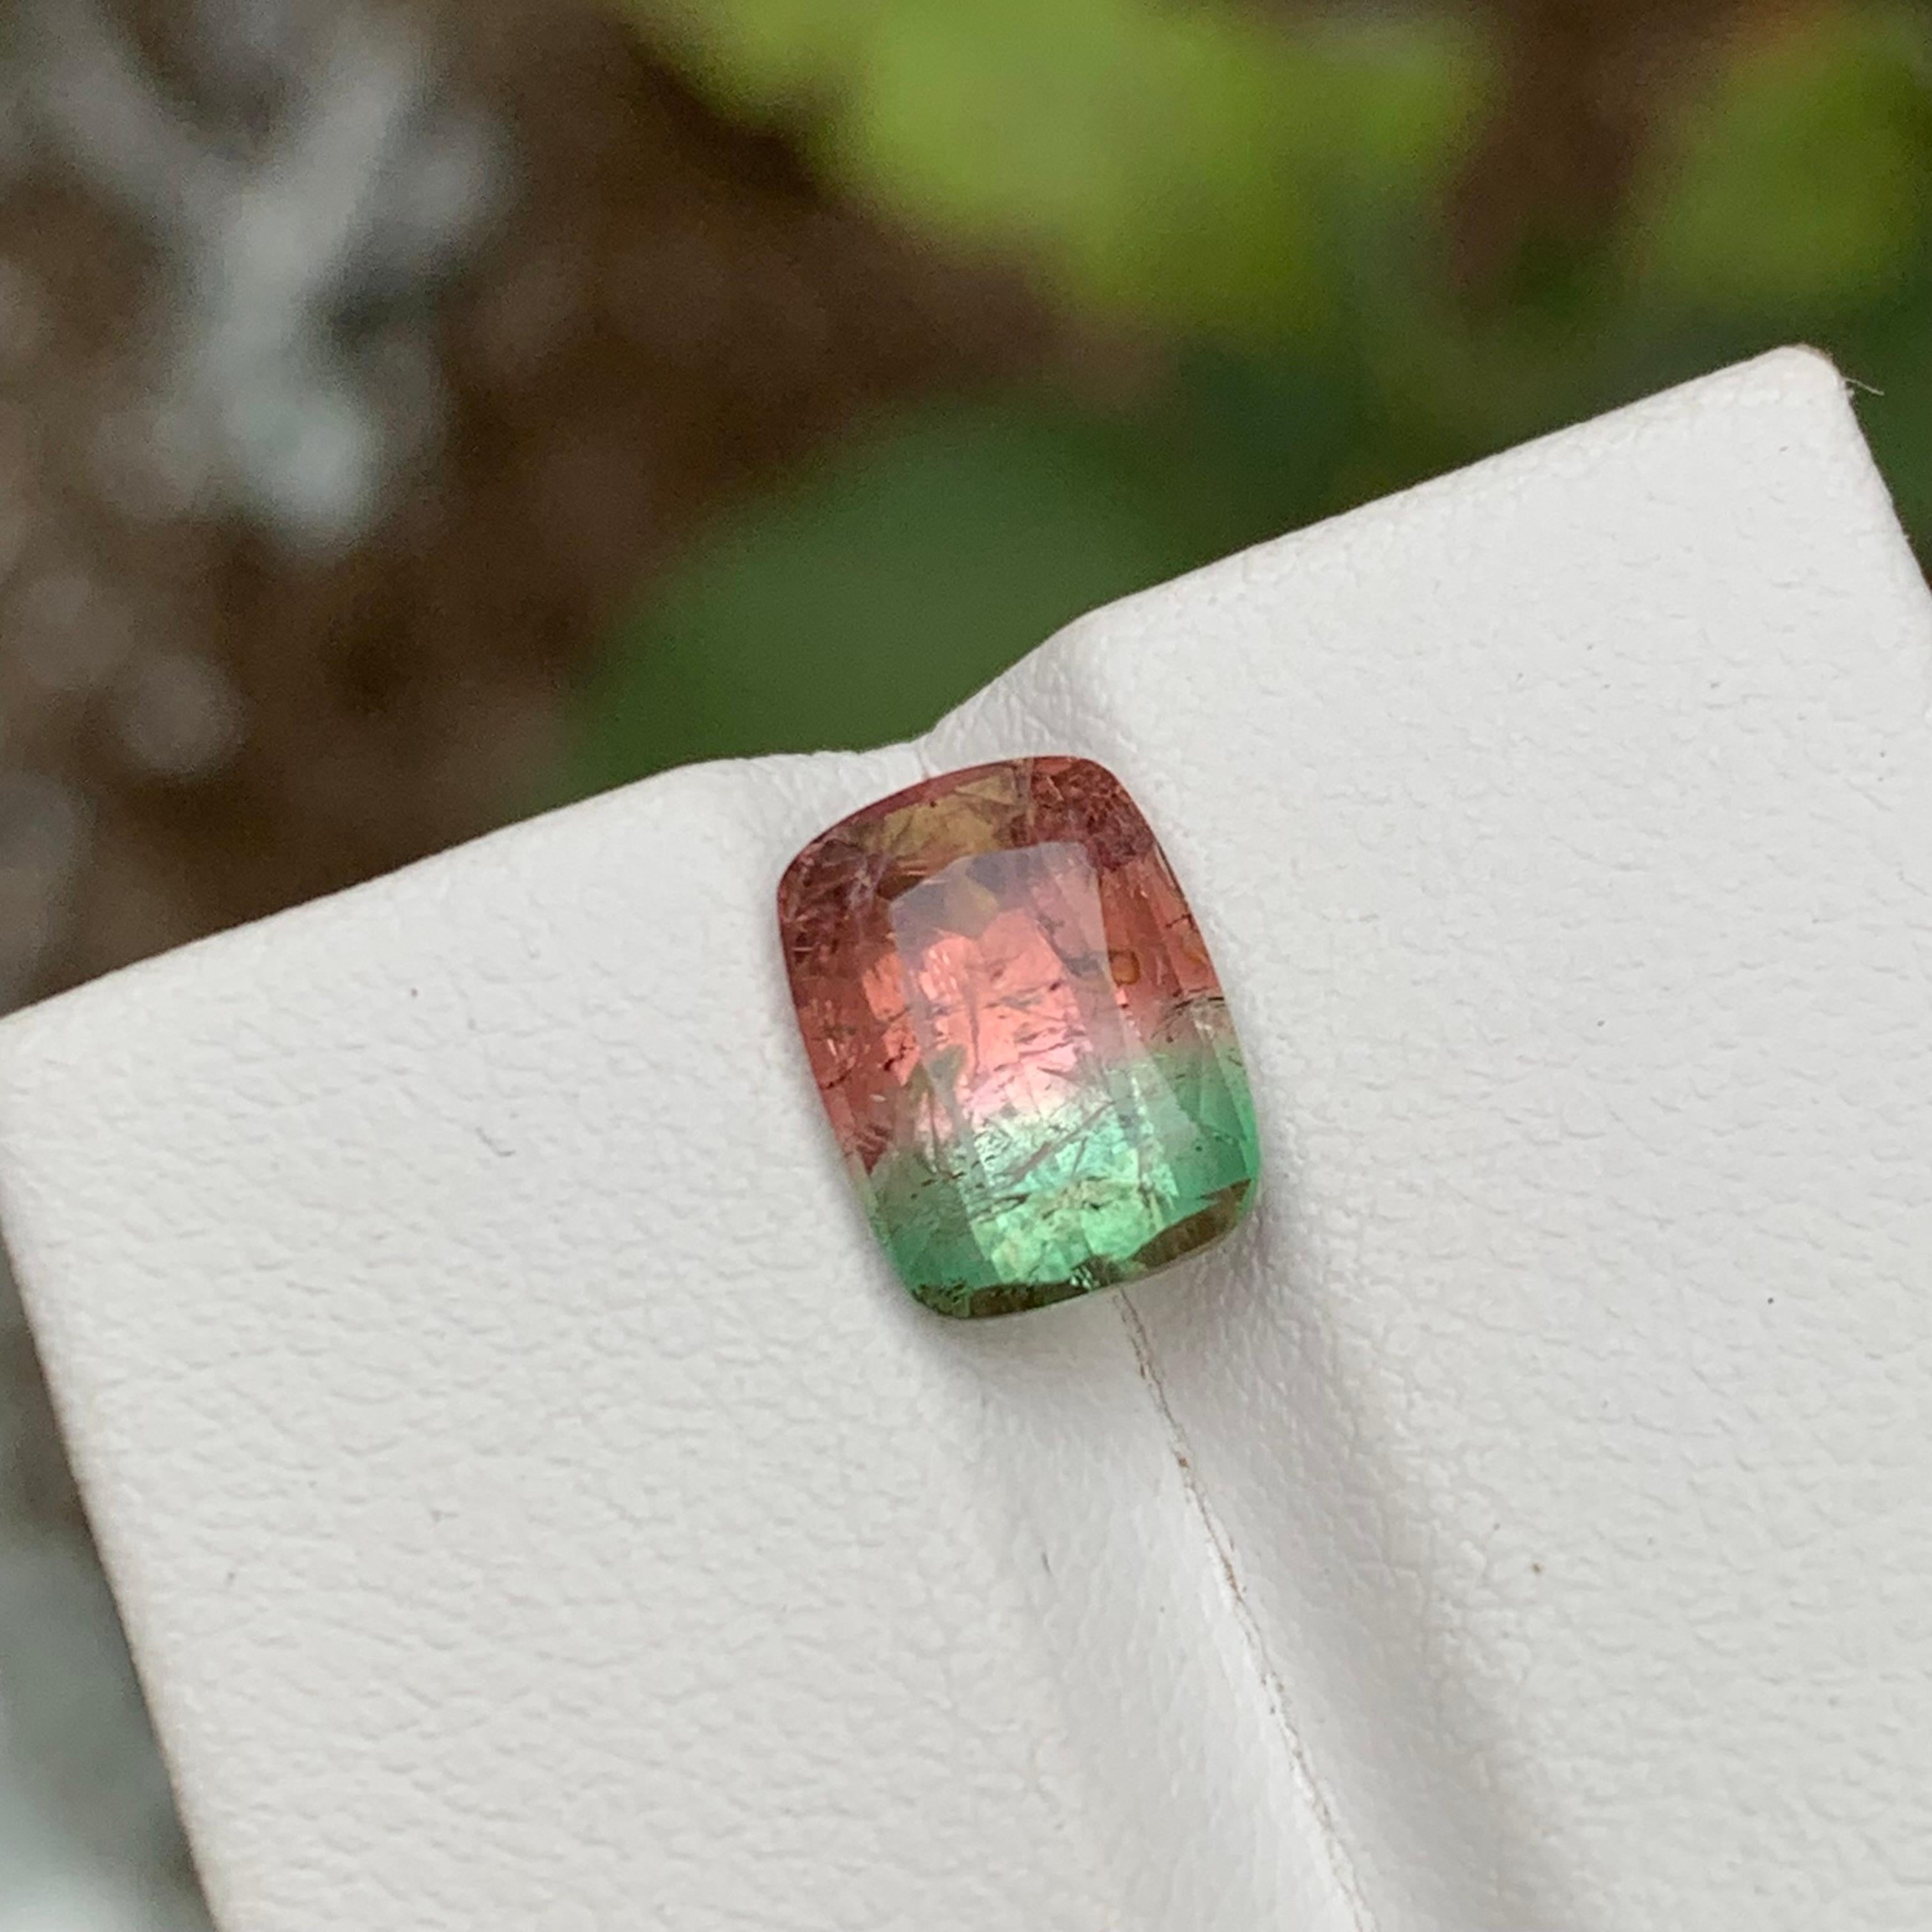 GEMSTONE TYPE: Tourmaline
PIECE(S): 1
WEIGHT: 3.05 Carats
SHAPE: Cushion 
SIZE (MM): 9.67 x 7.12 x 5.79
COLOR: Watermelon Bicolor
CLARITY: Moderately Included 
TREATMENT: Heated
ORIGIN: Afghanistan
CERTIFICATE: On demand

Introducing a breathtaking